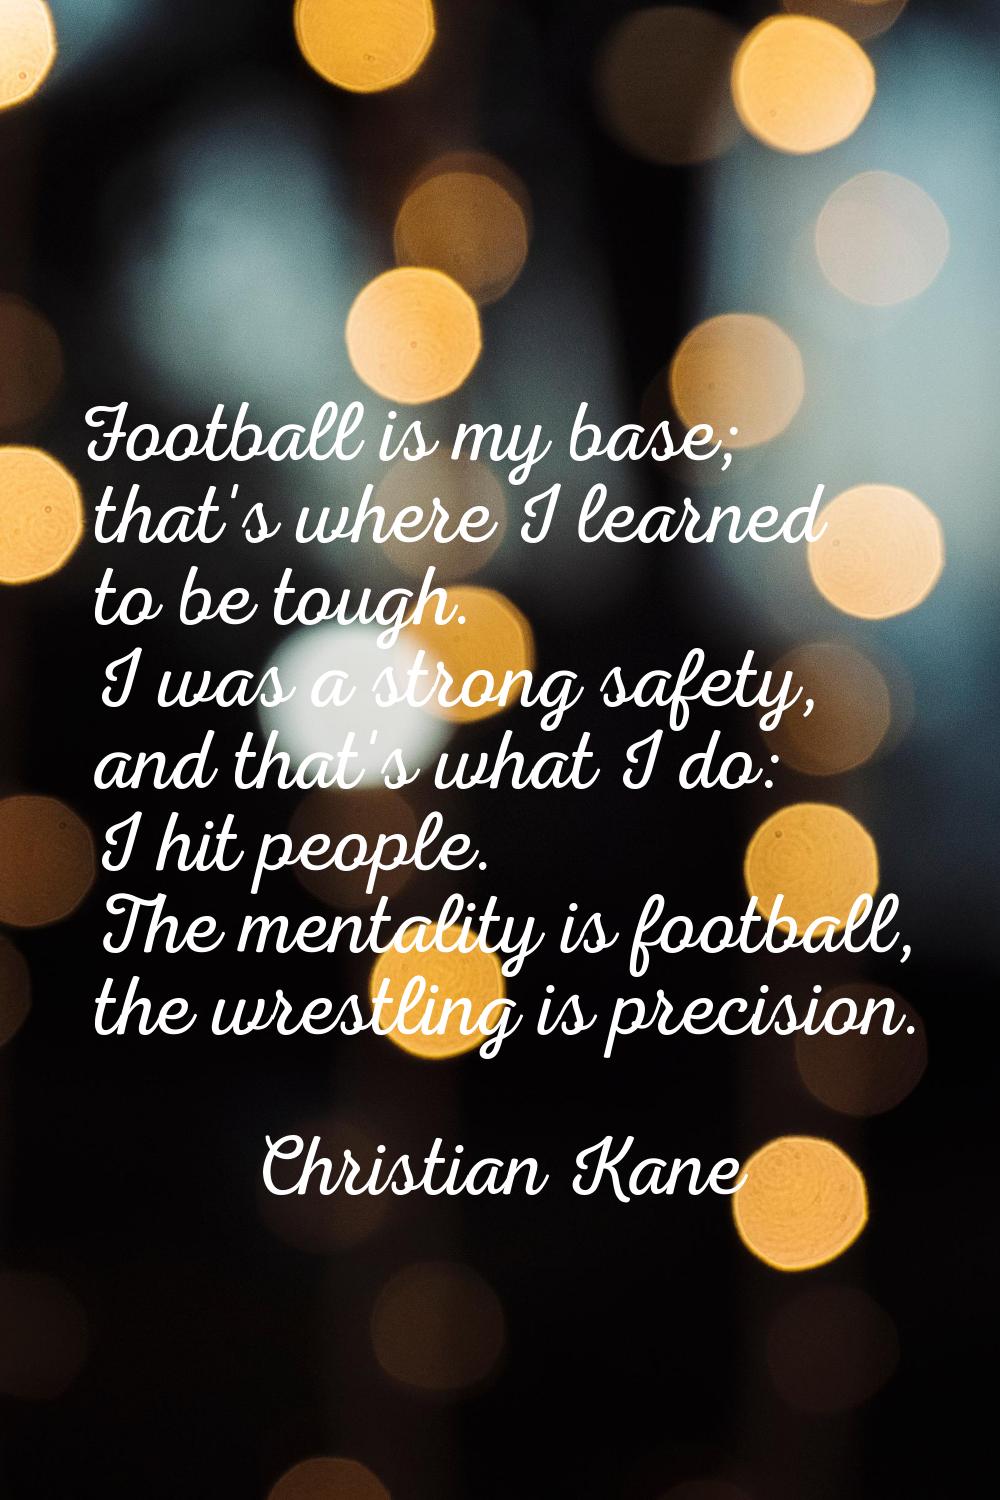 Football is my base; that's where I learned to be tough. I was a strong safety, and that's what I d